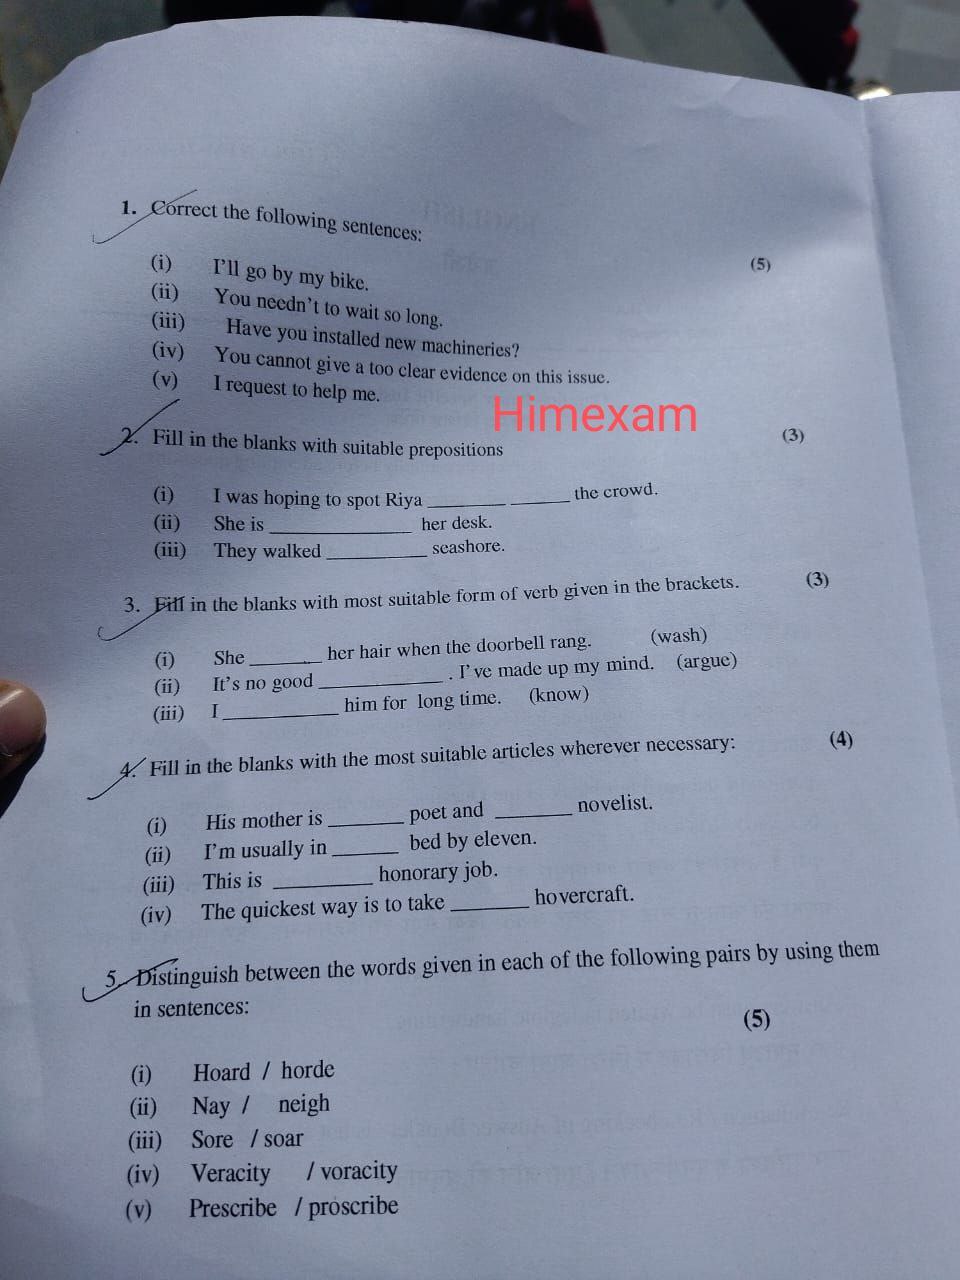 HPPSC Naib Tehsildar Mains General English  Question Paper Held on 22 February 2023